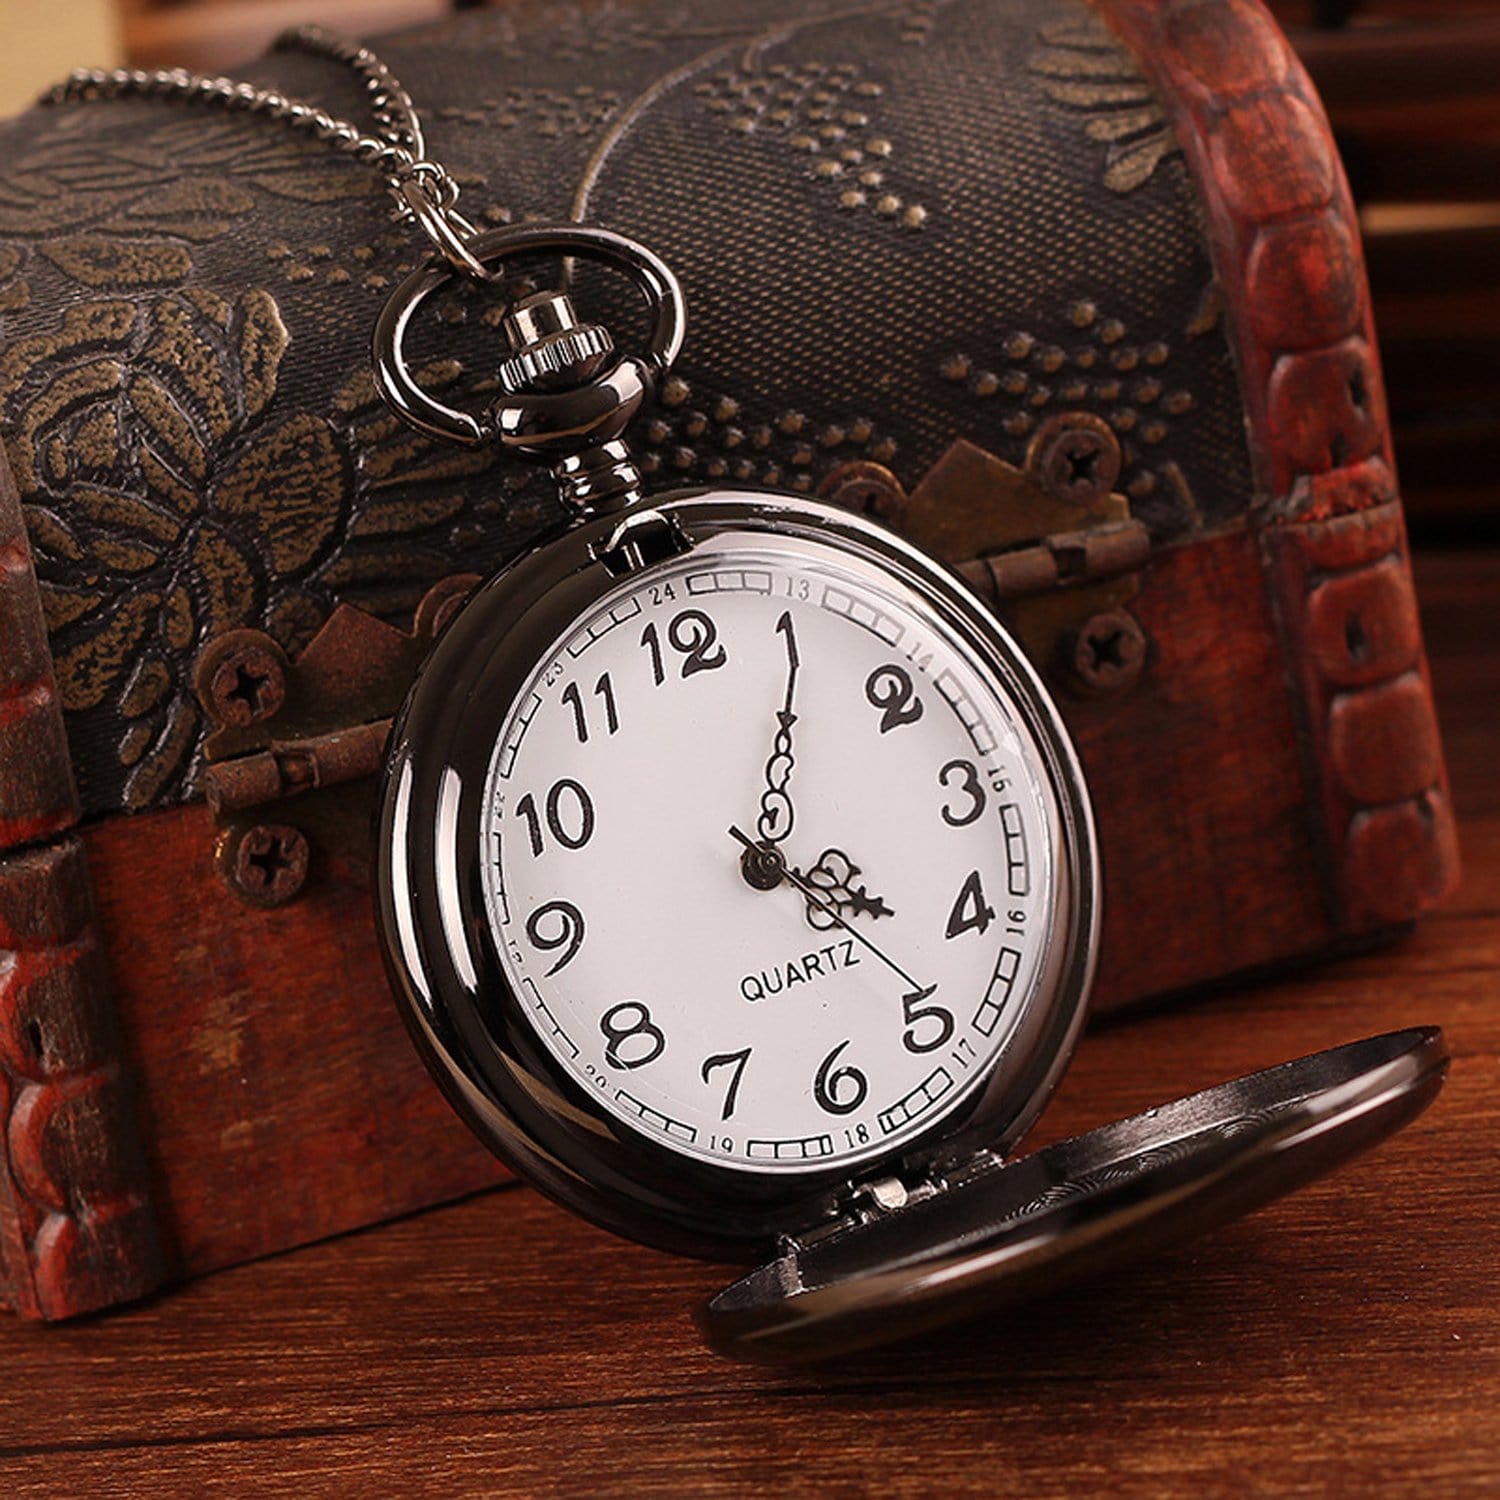 Pocket Watches For Husband To My Husband - I Love You For All That You Are Pocket Watch GiveMe-Gifts